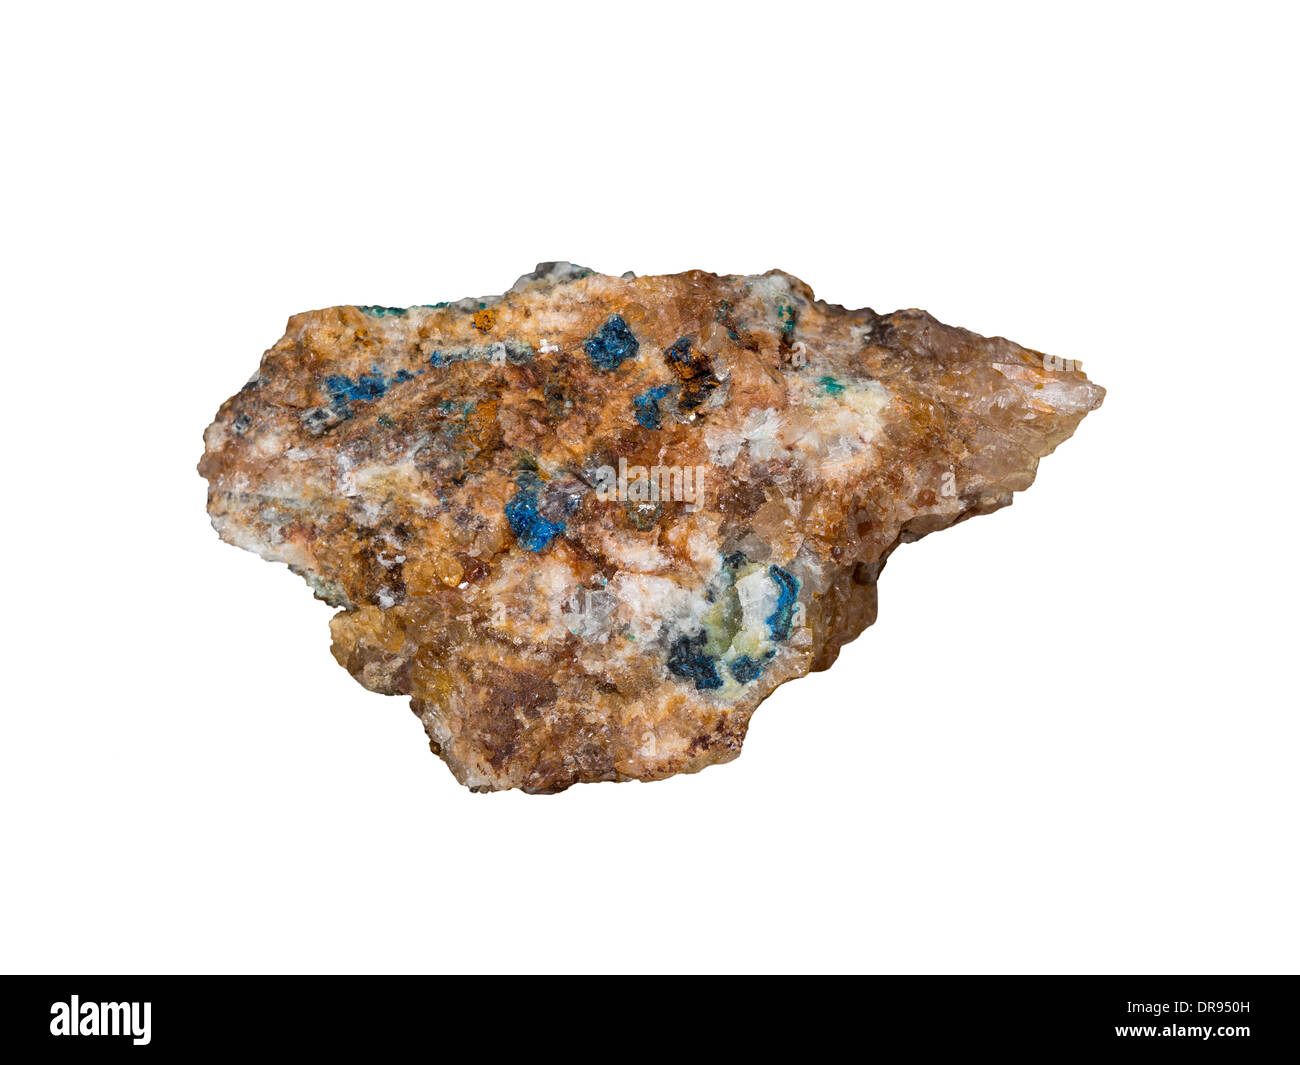 Linarite (blue) and Caledonite (green) minerals from Red Ghyll Mine Caldbeck Fells Cumbria UK Stock Photo